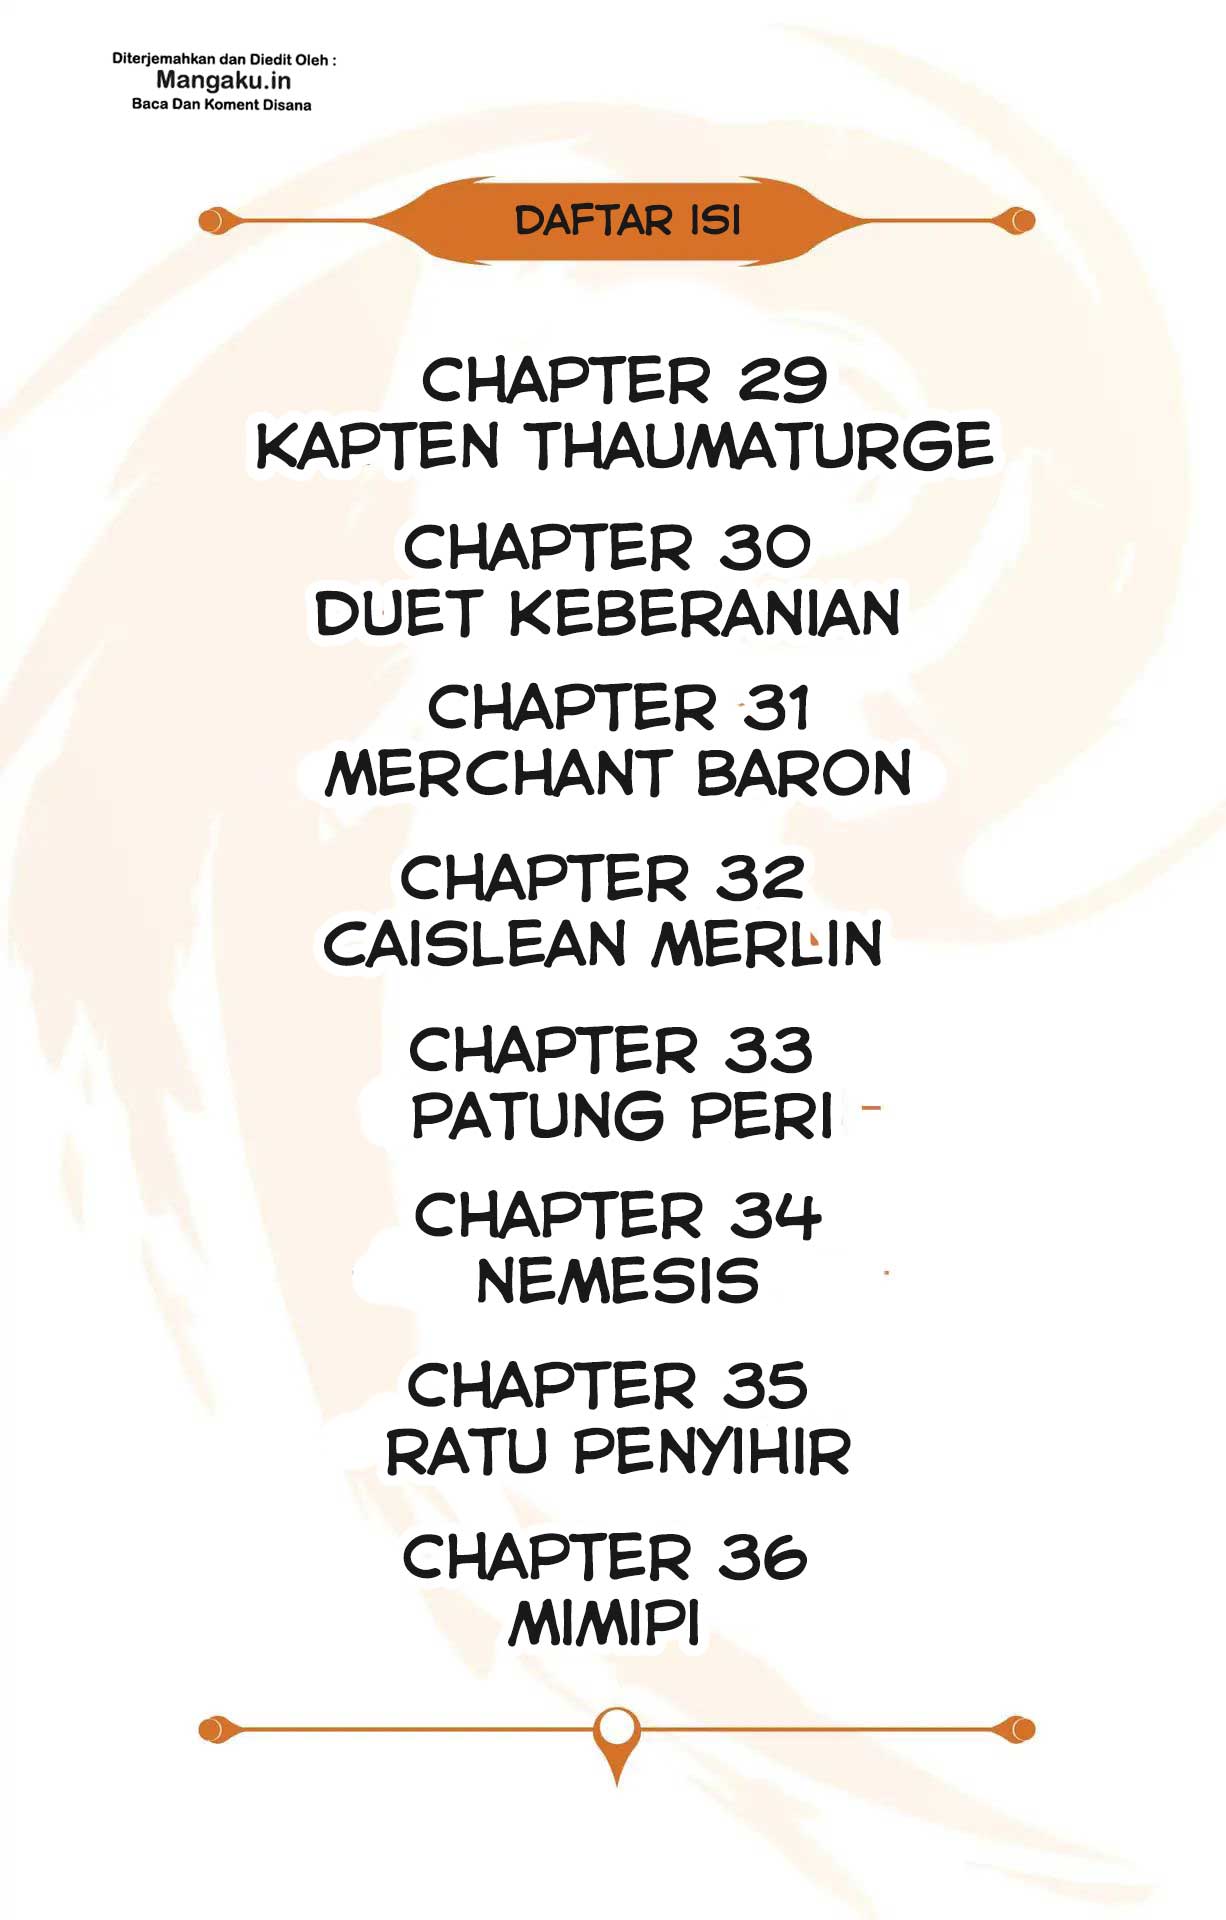 Radiant Chapter 29